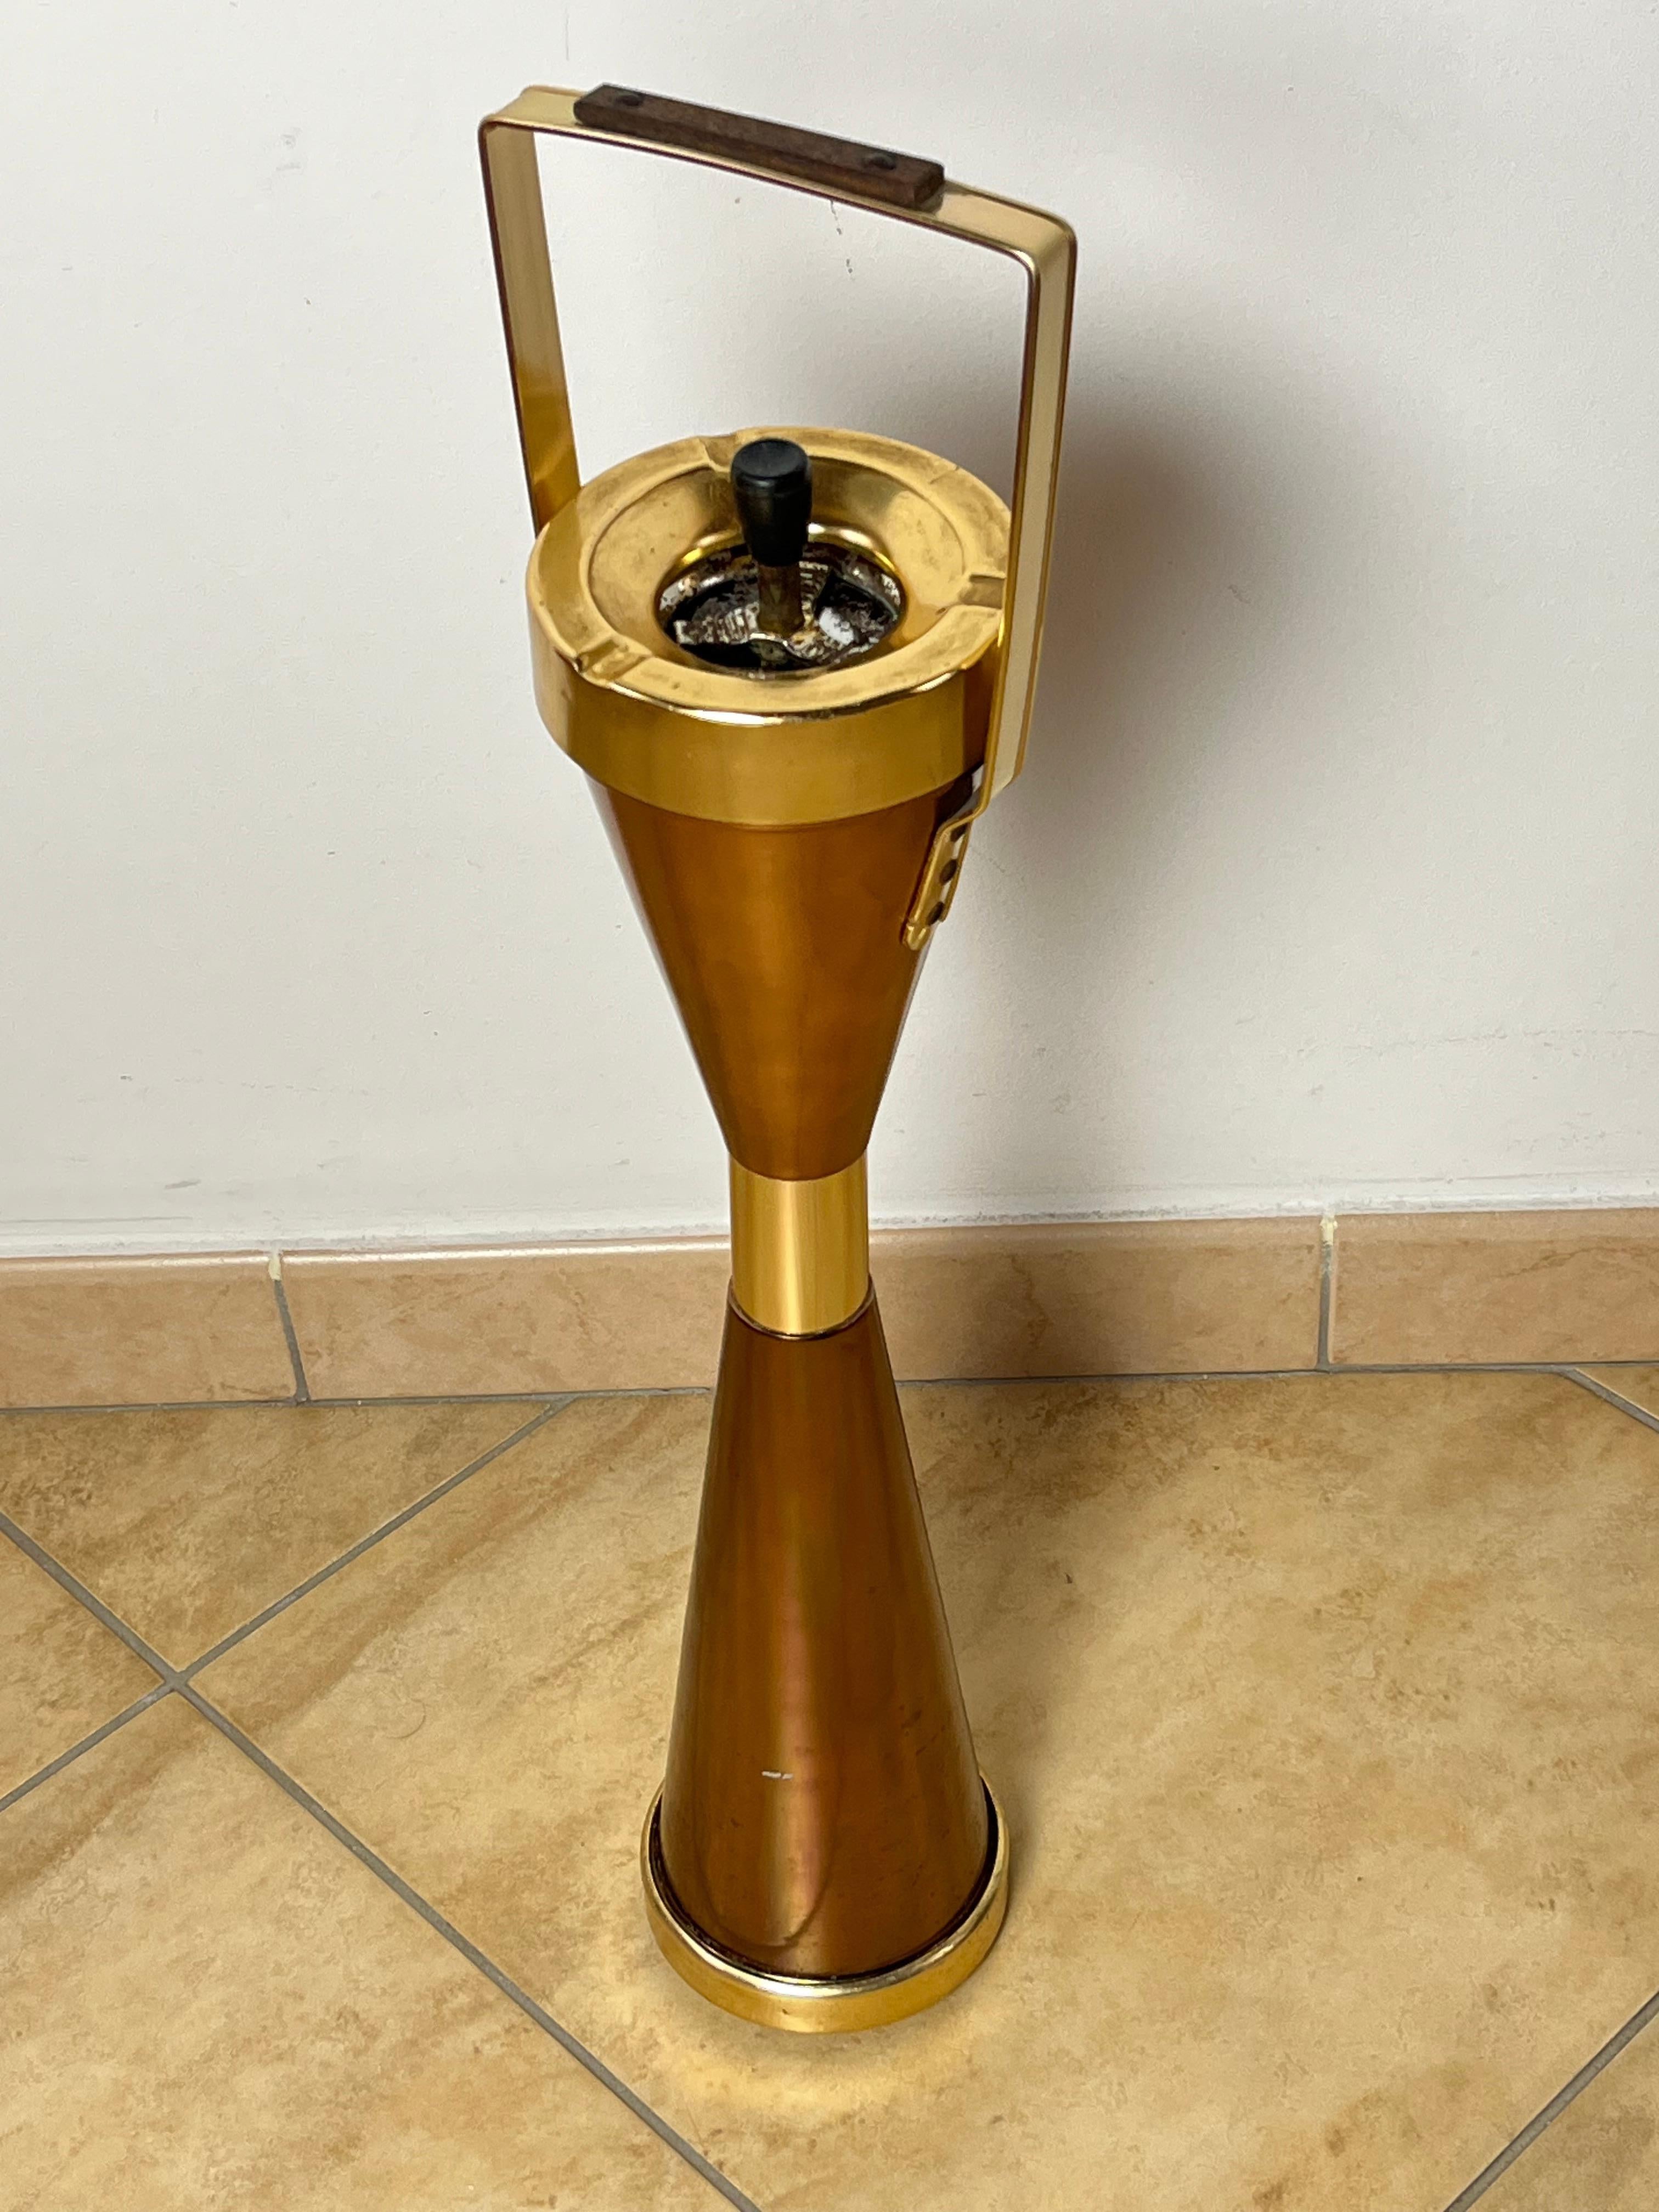 Column ashtray in brass and copper, Italy, 1950s
Found in a notary's office, it is intact and functioning. It has oxidation on the small central metal part.